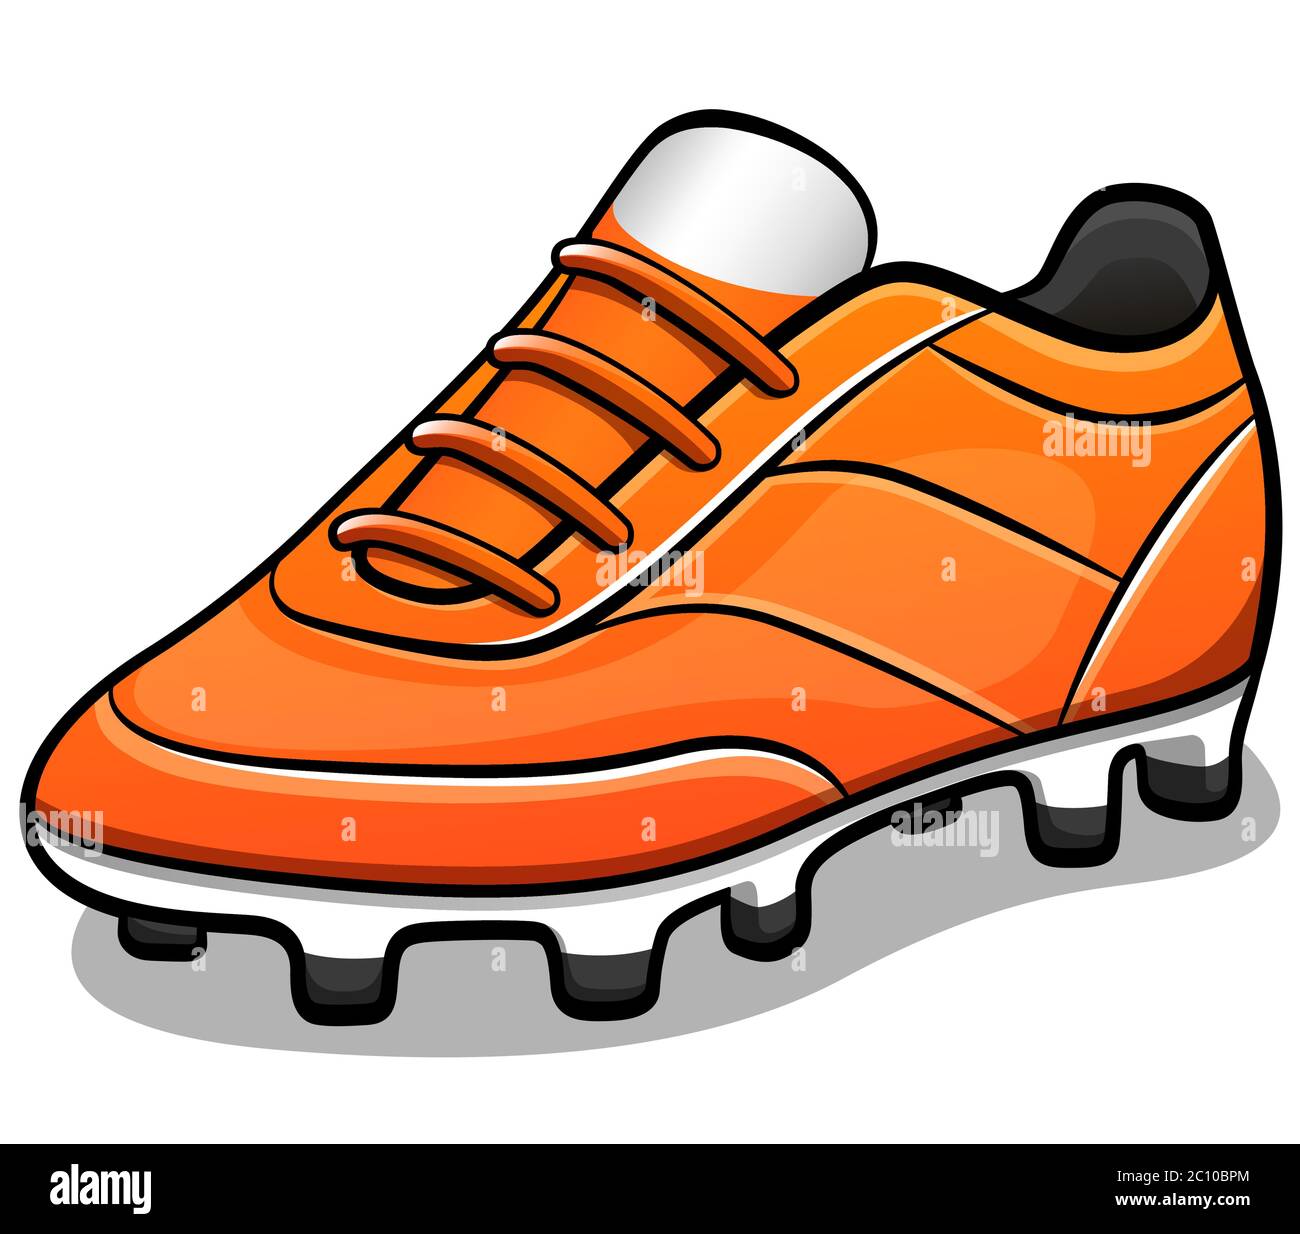 Vector illustration of soccer shoes design isolated Stock Vector